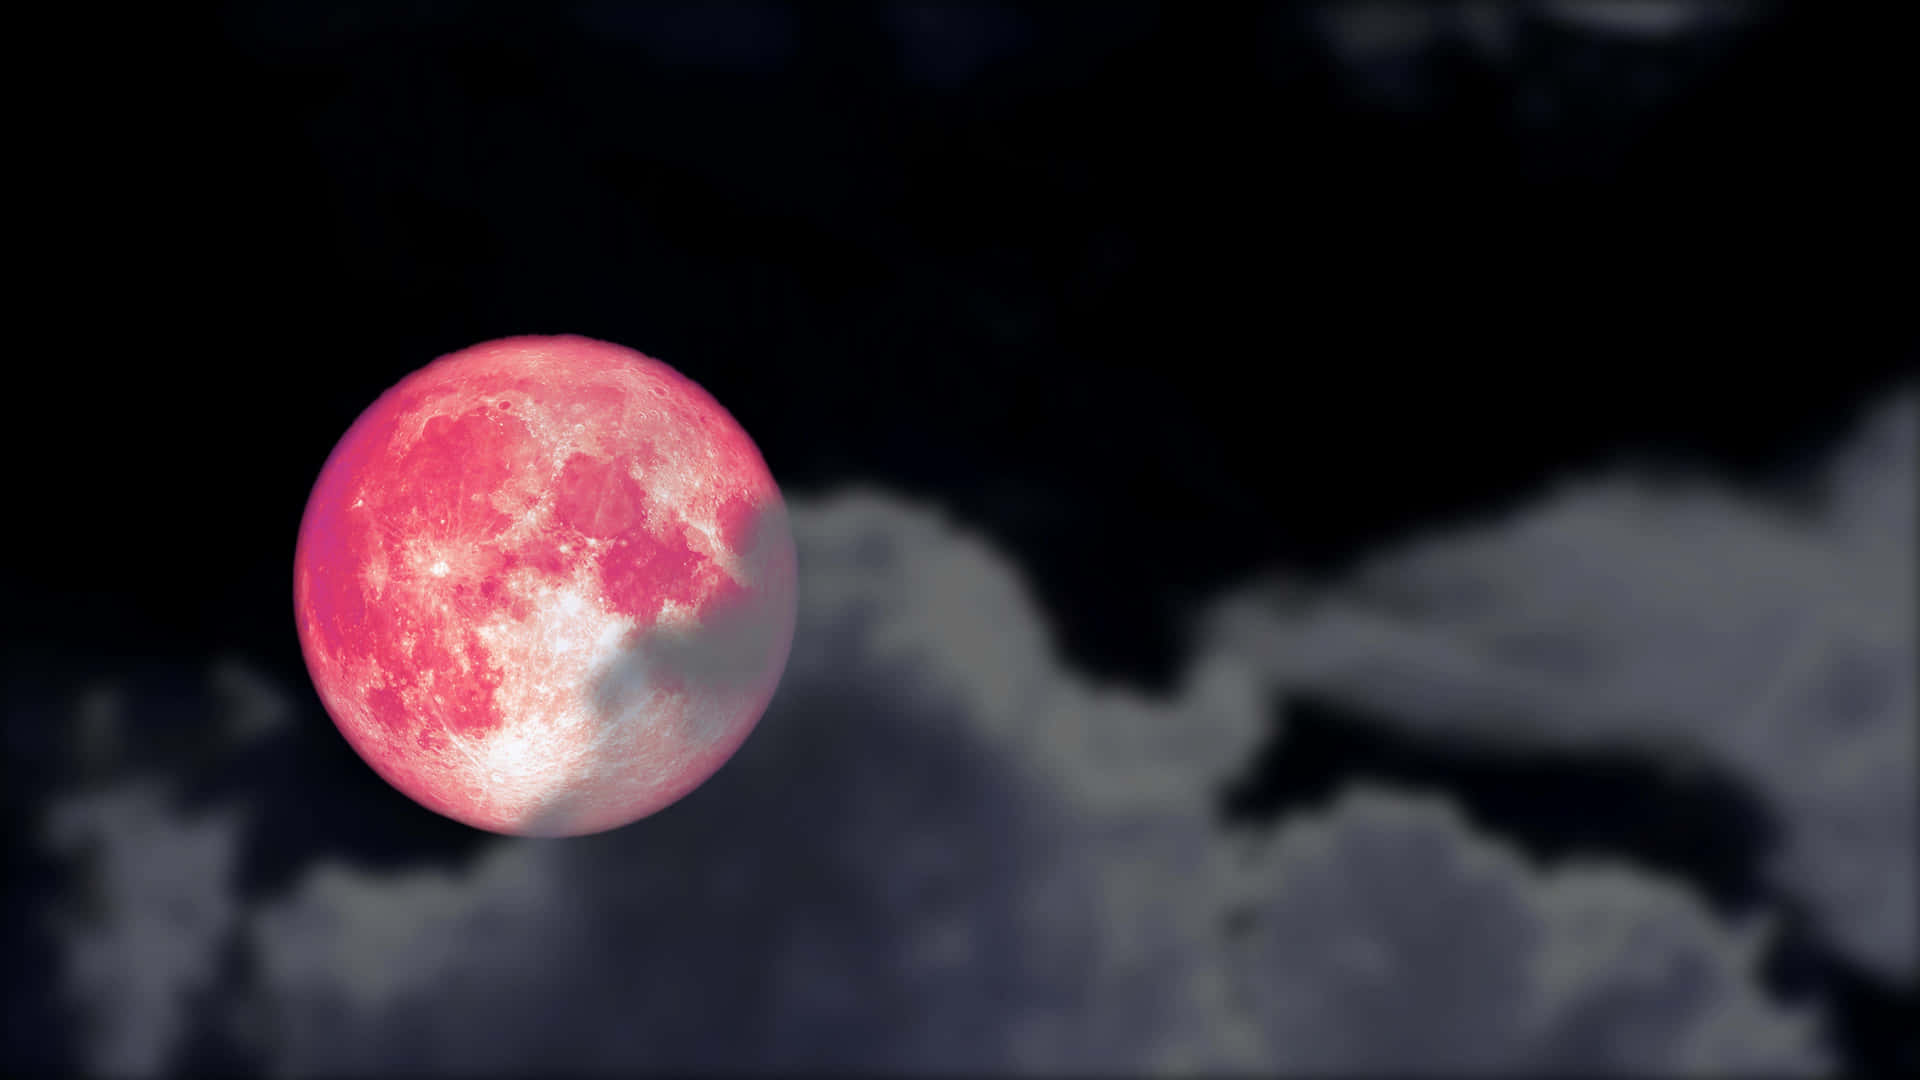 A breathtaking shot of a pink moon rising in the night sky